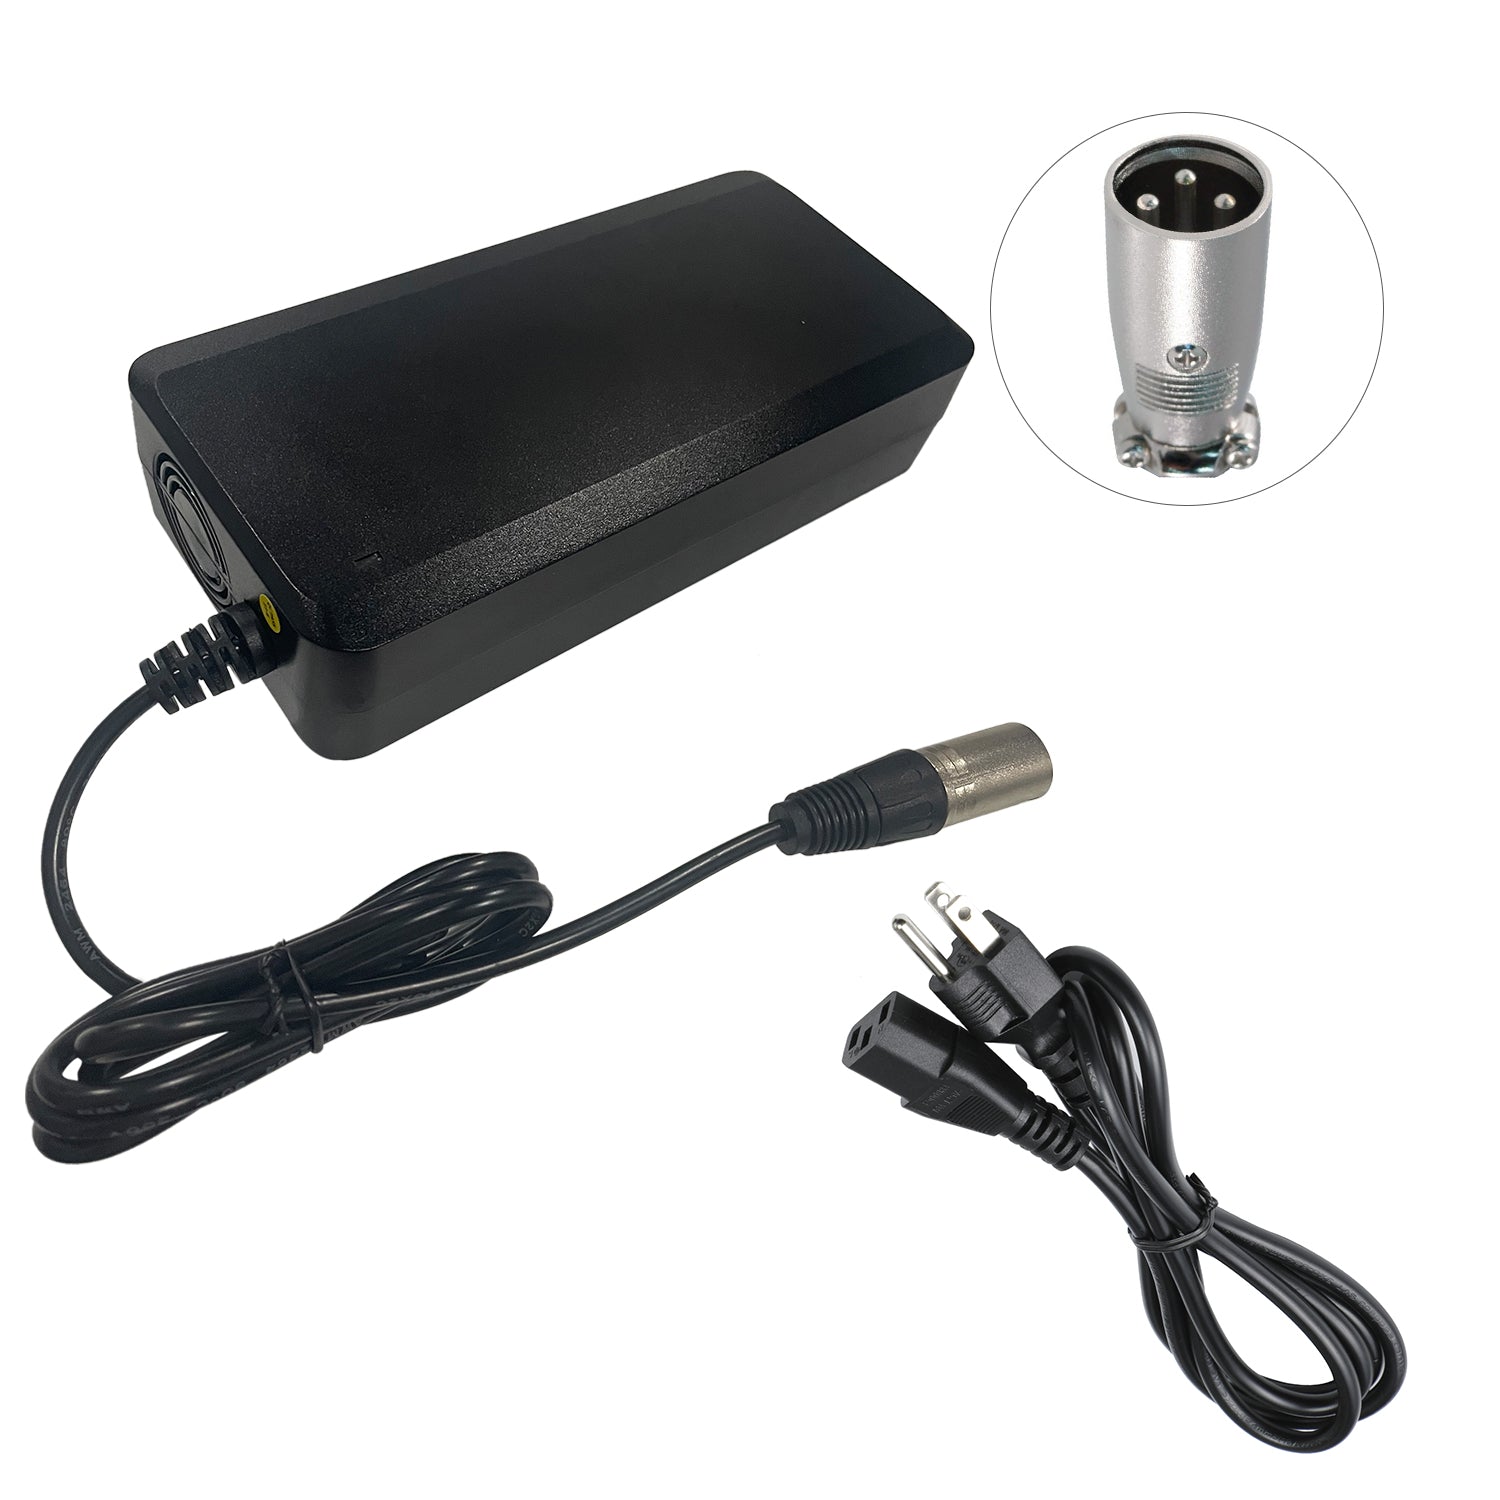 UL Listed 24V 8A Charger for Hoveround Series Scooters